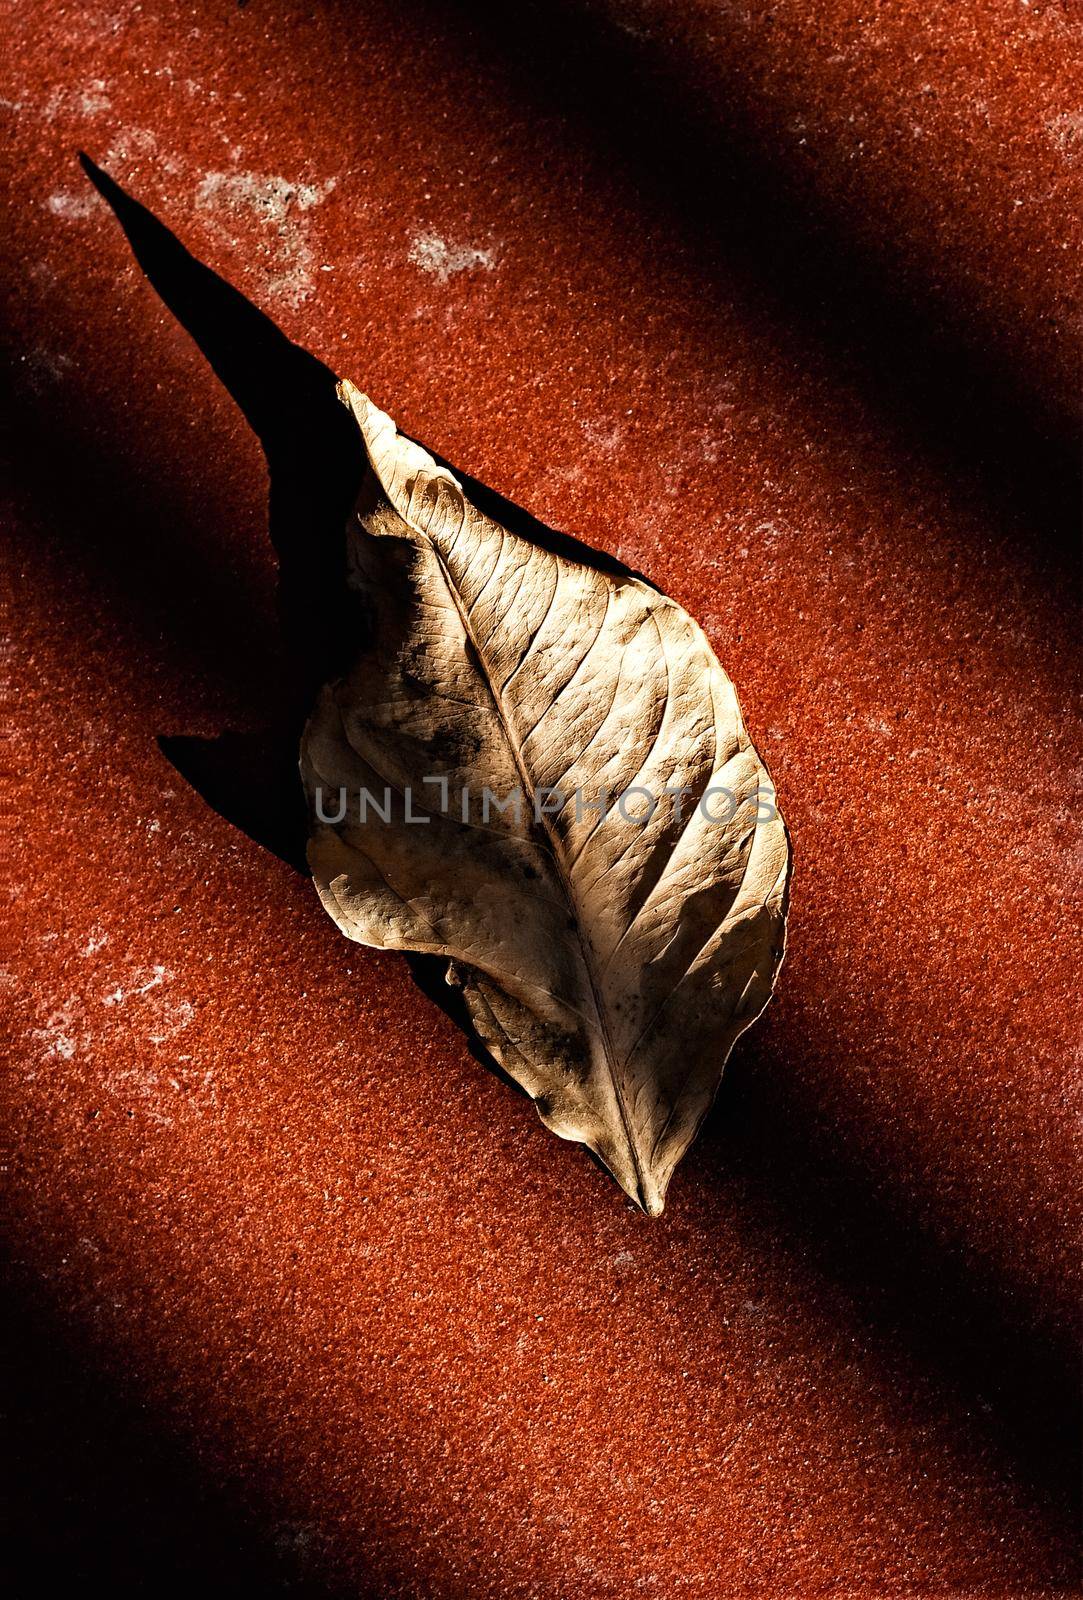 Dry leaf on the ground in the shadows of a grating. Vertical image.